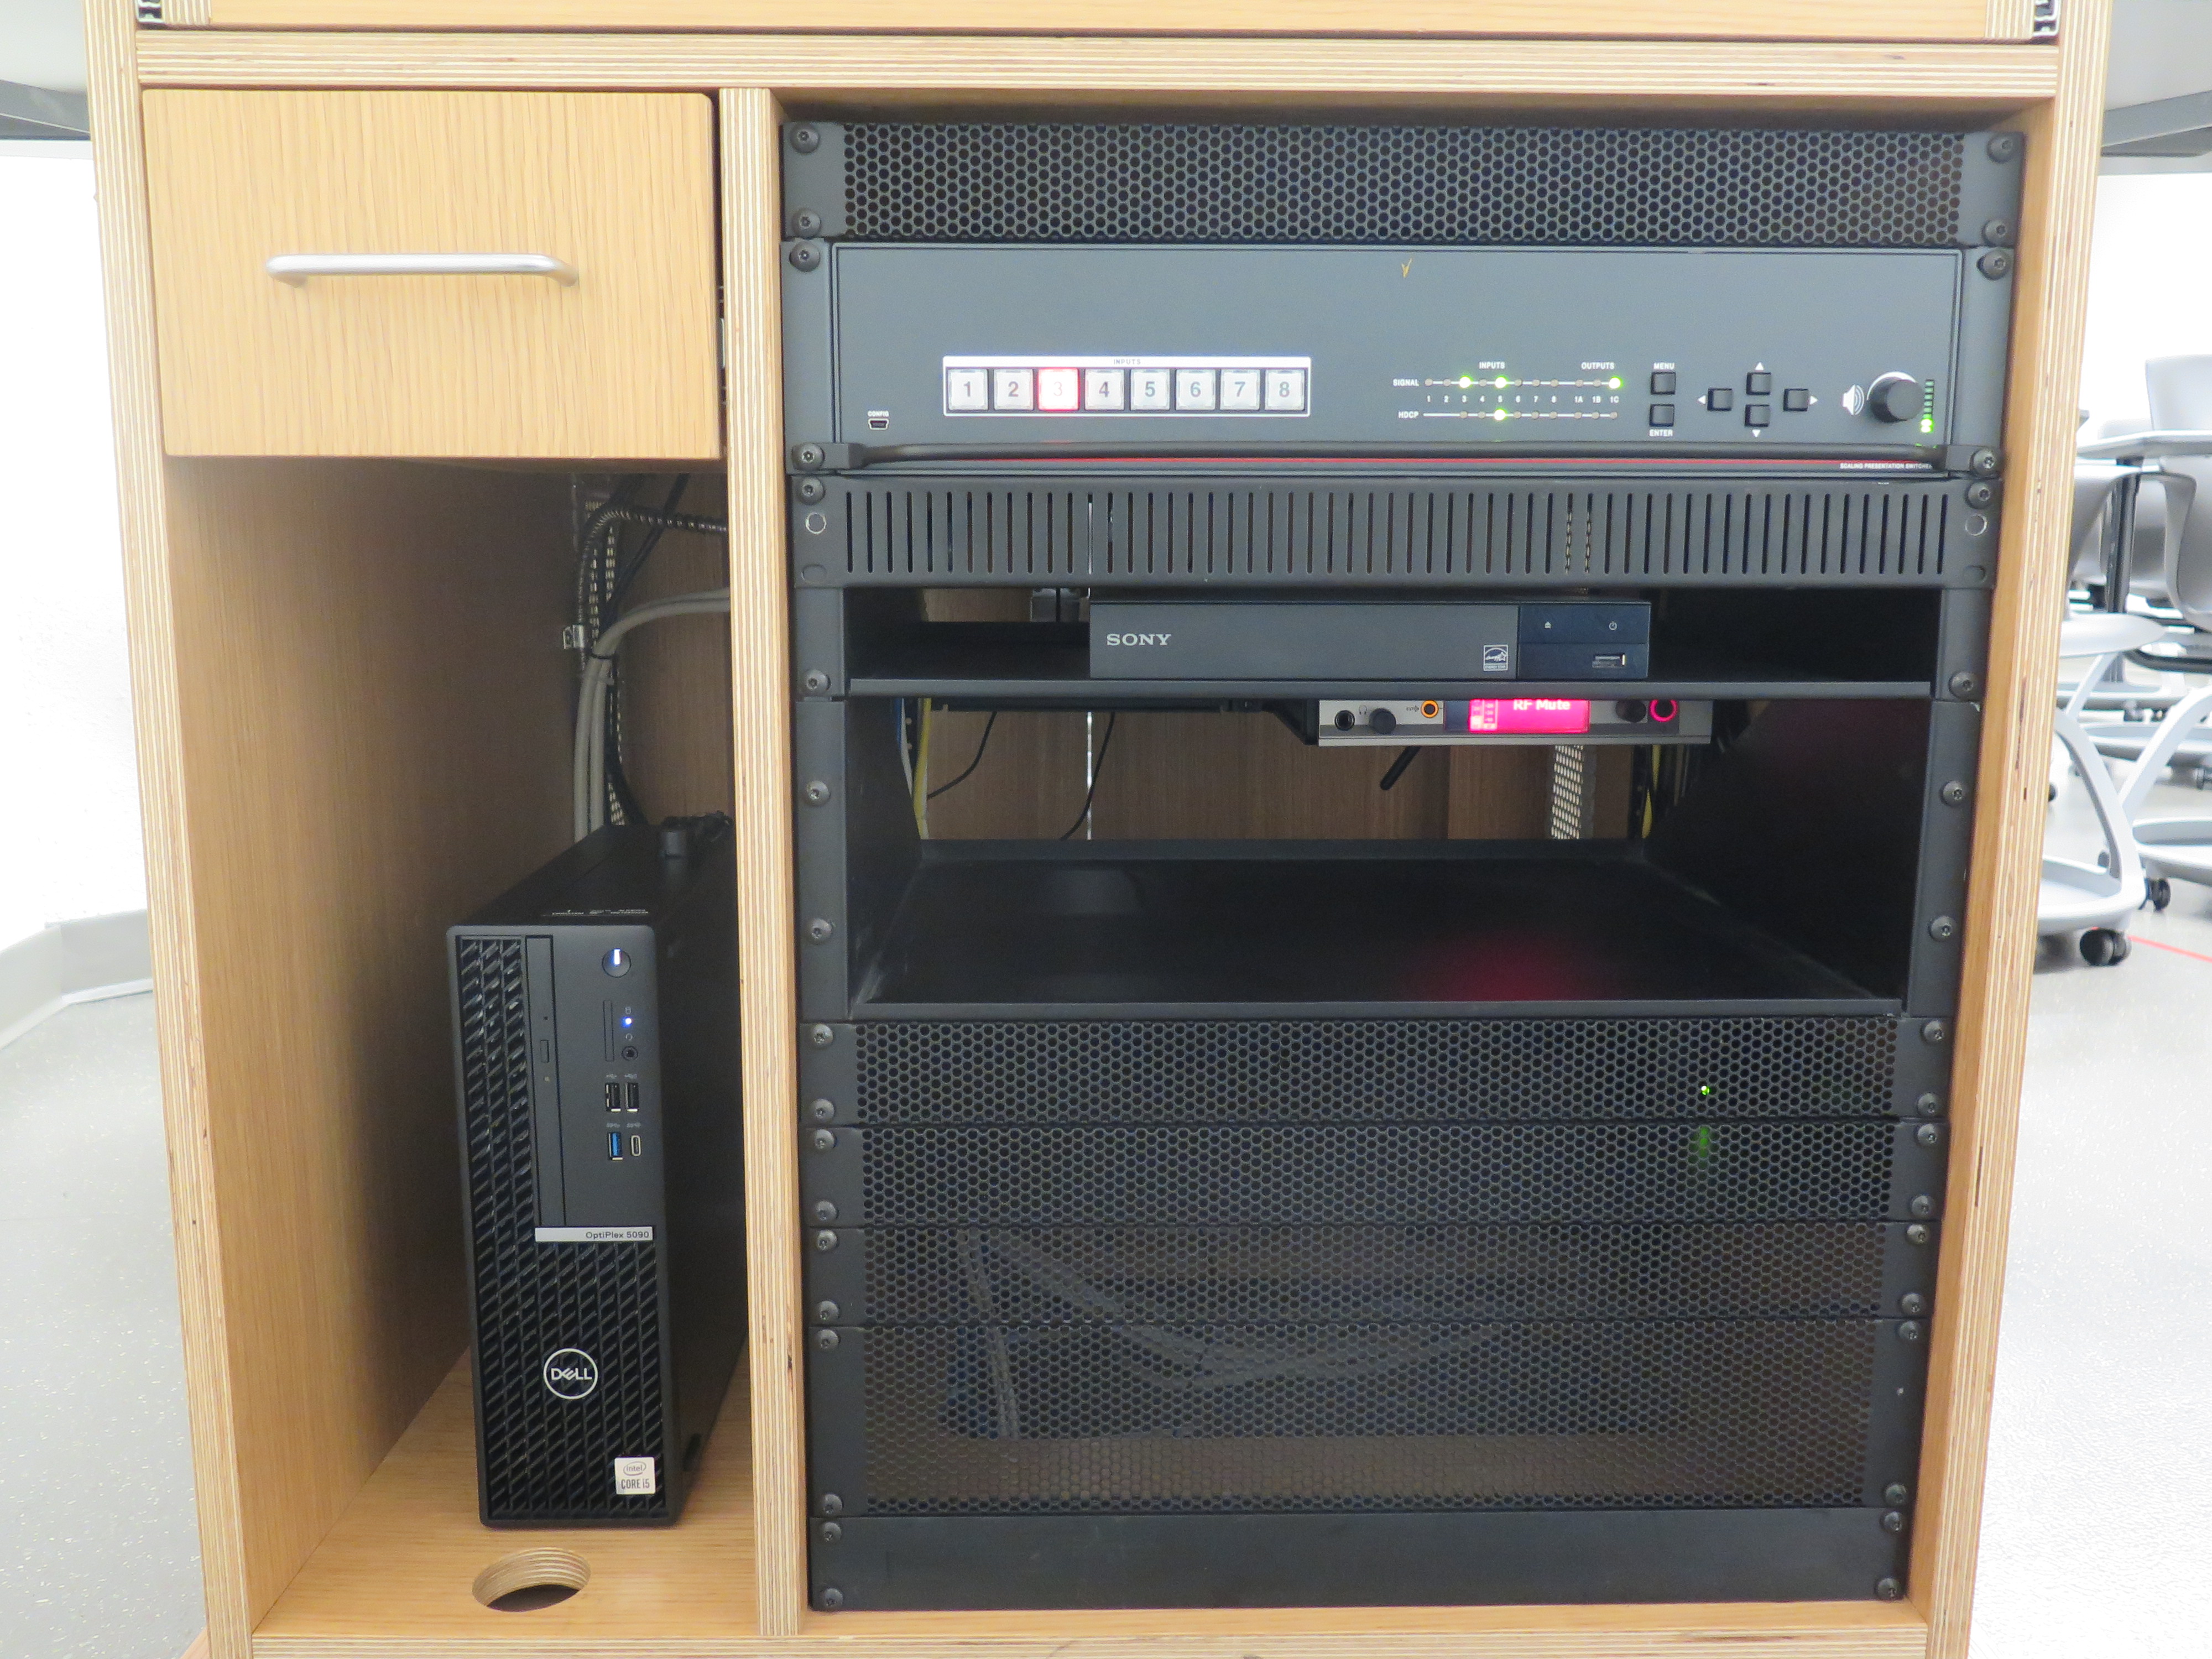 Equipment rack consists of AV Switcher, DVD Player and Dell Computer CPU.